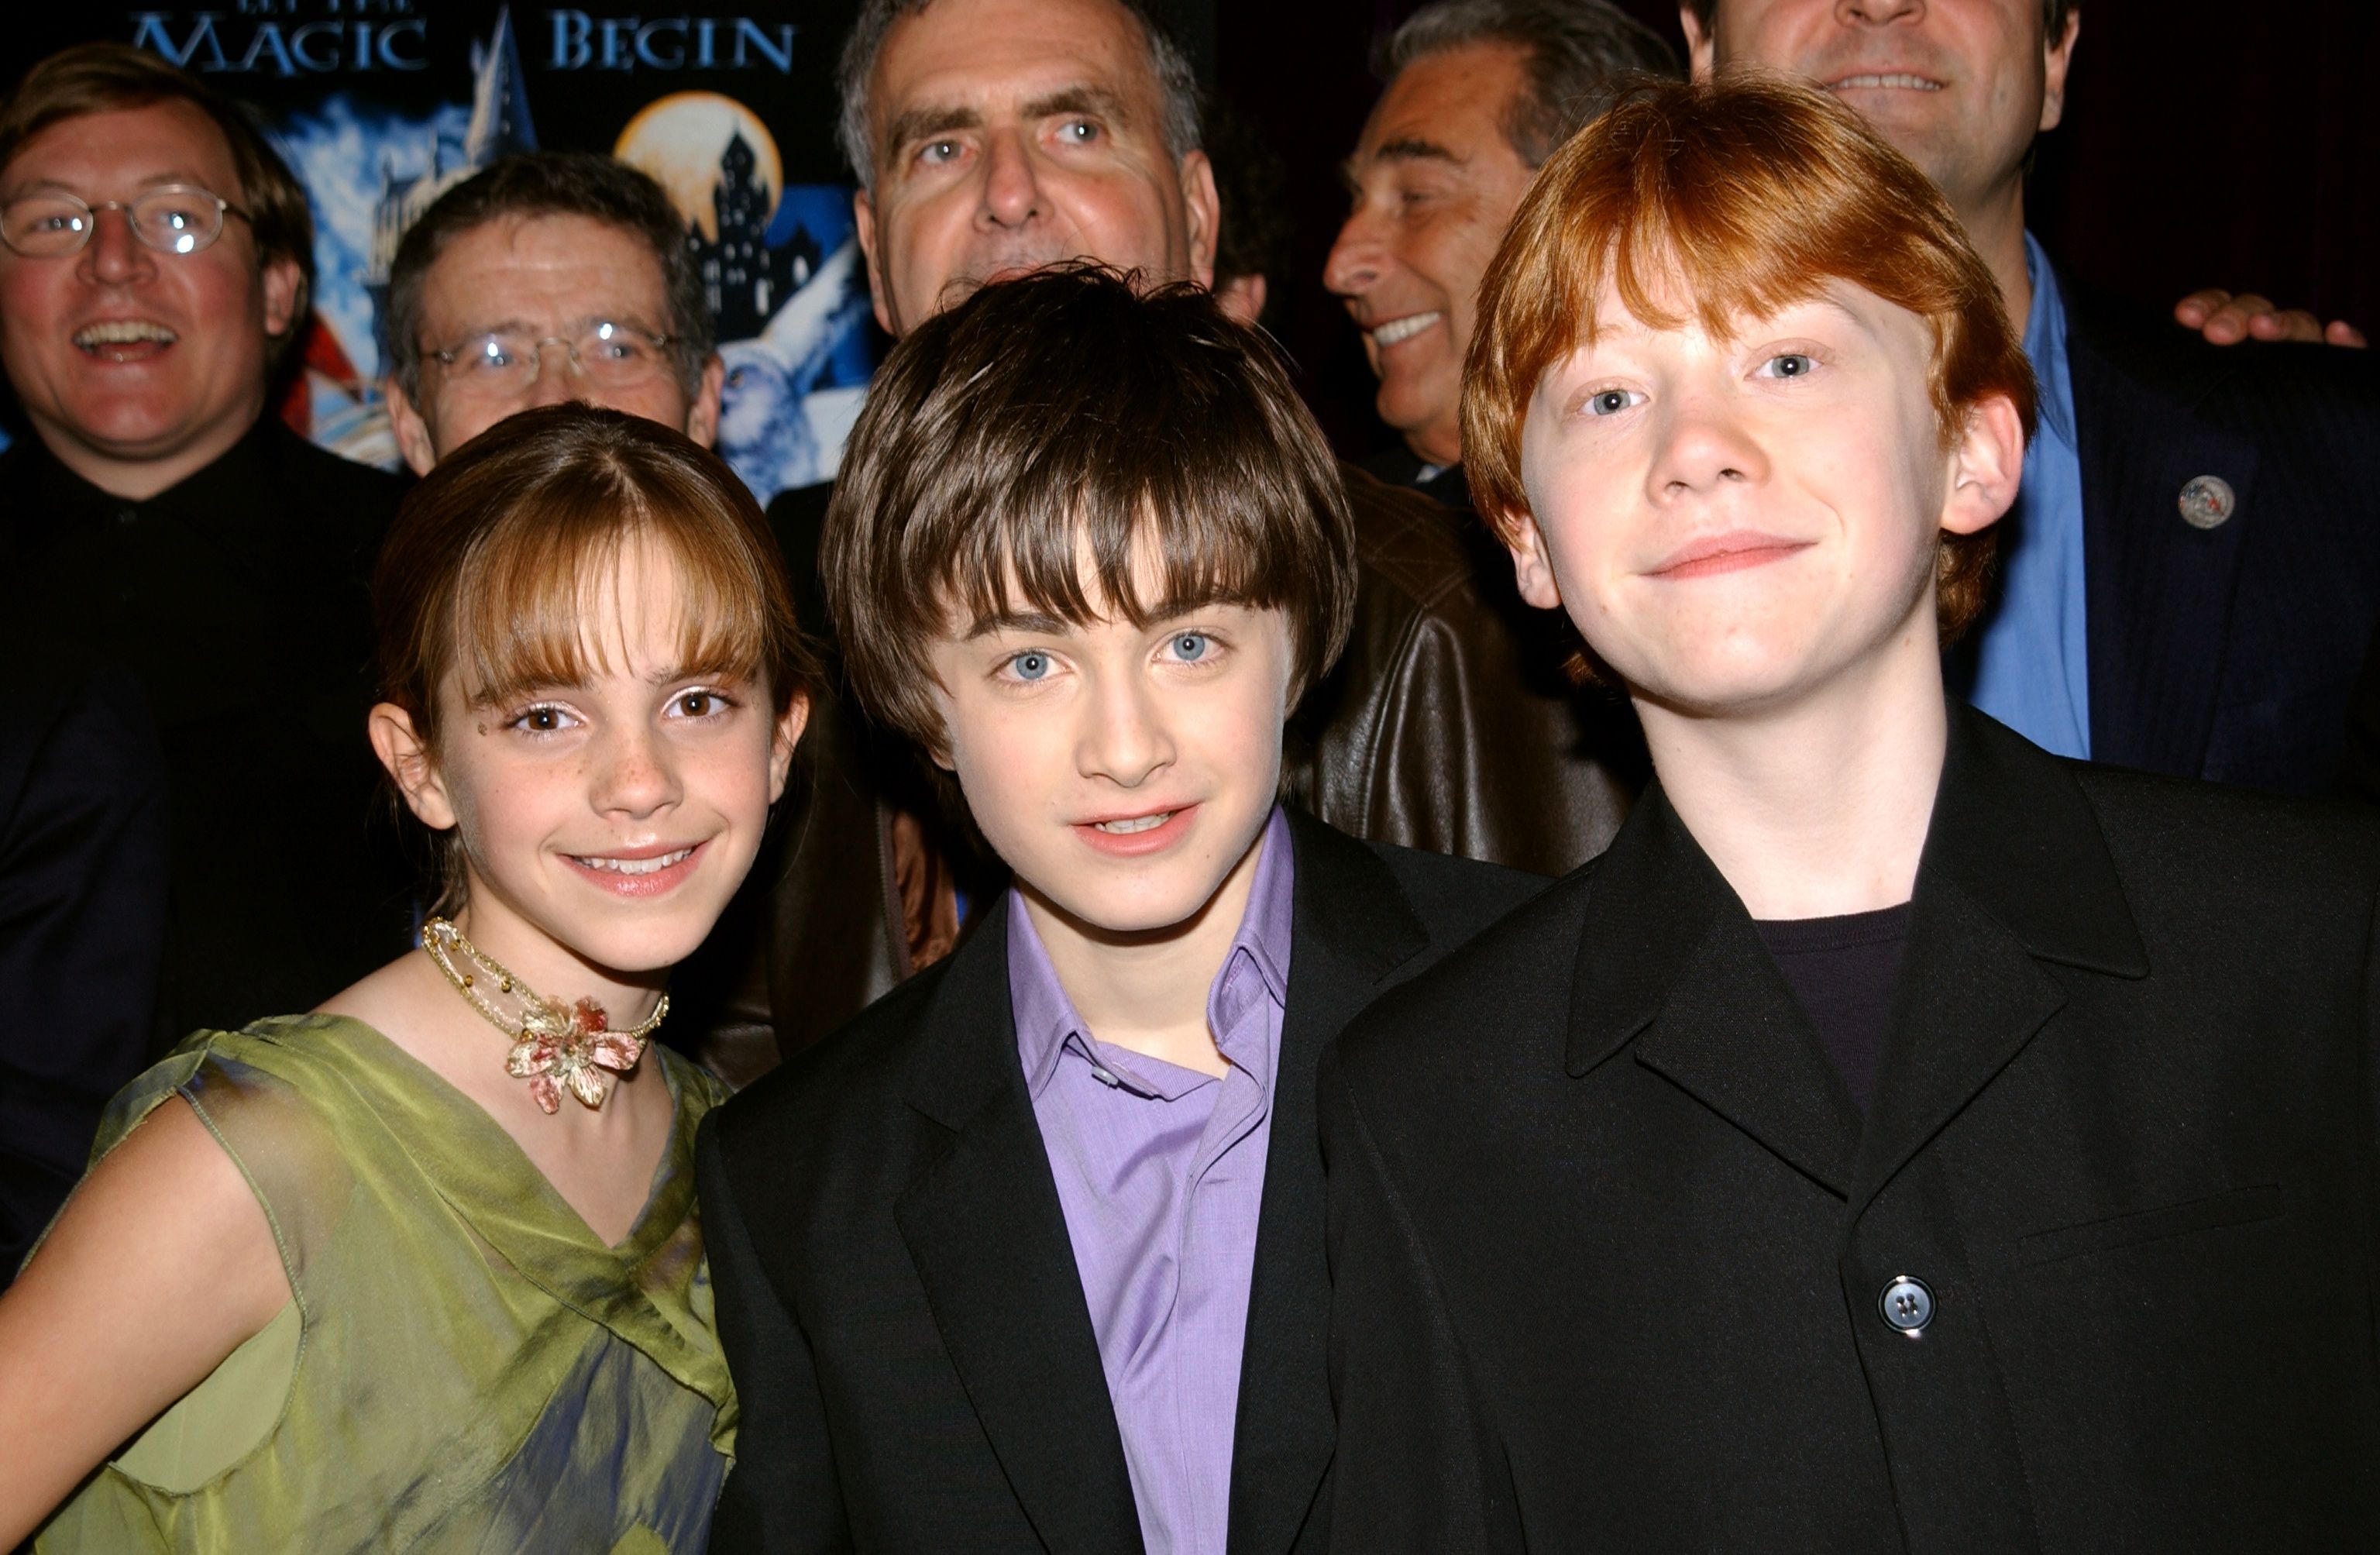 Emma Watson, Daniel Radcliffe and Rupert Grint at the New York premiere of "Harry Potter and the Sorcerer's Stone"  | Source: Getty Images